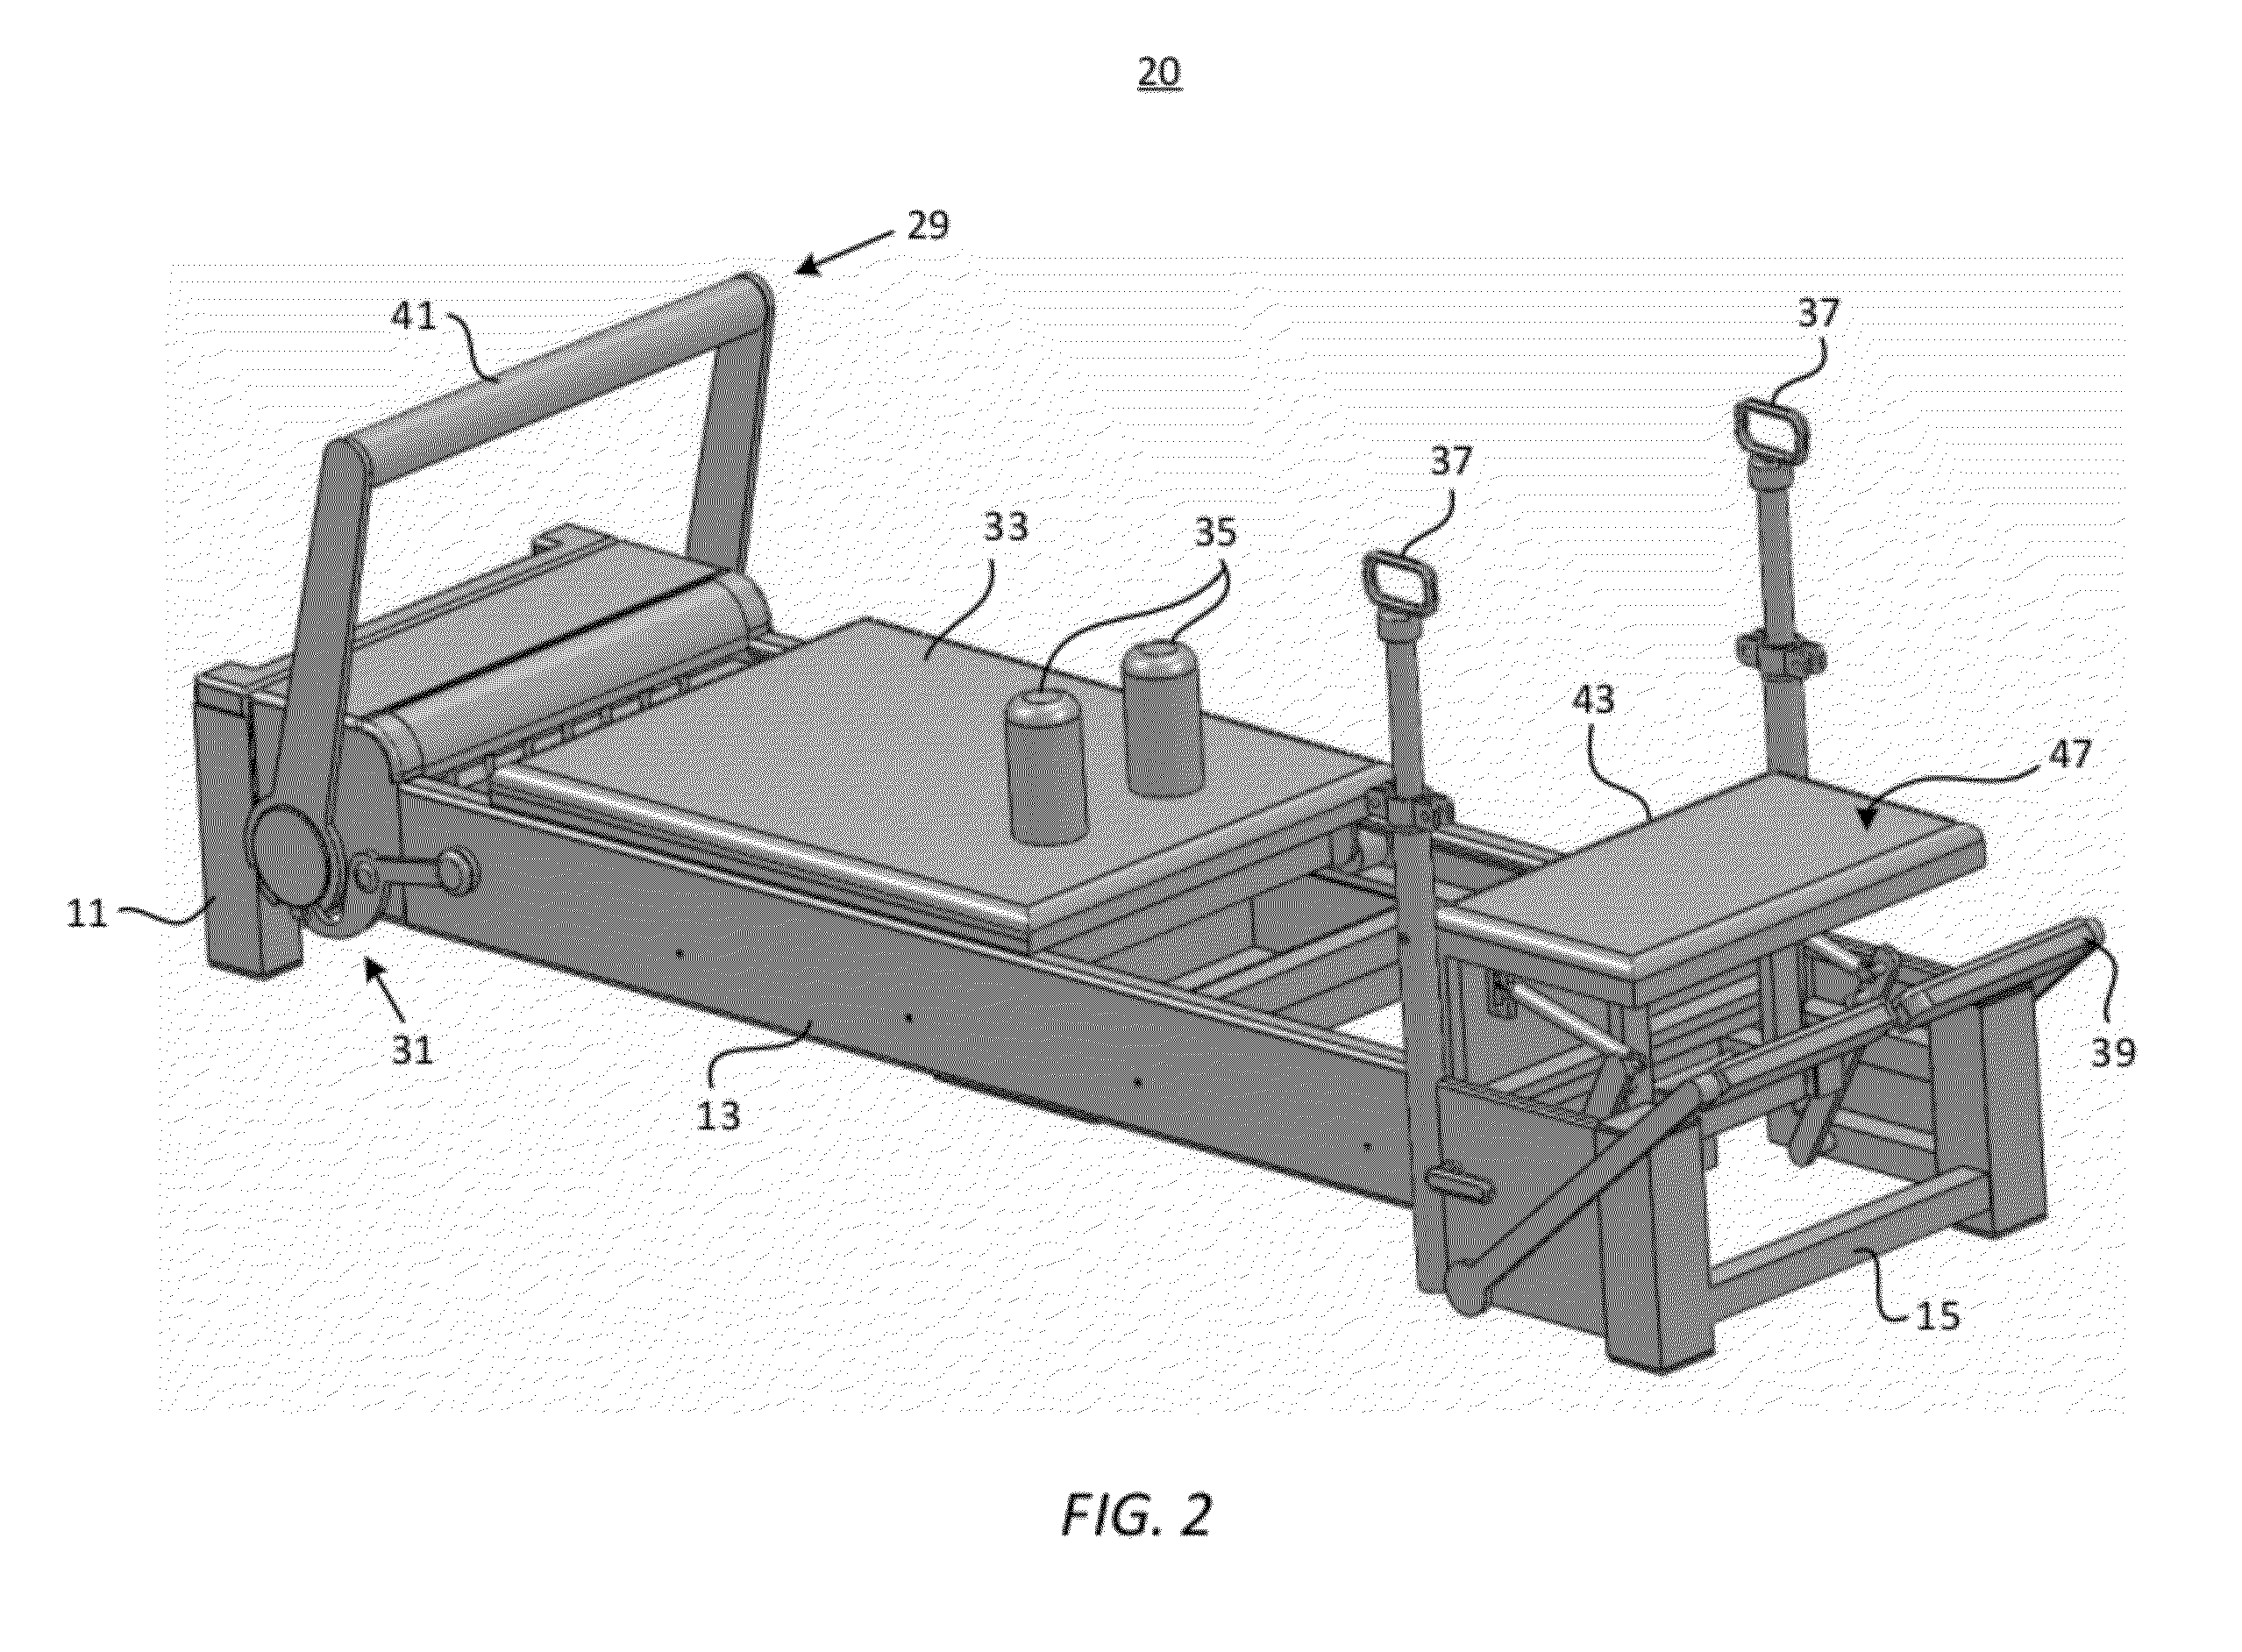 Reformer Apparatus Having Integral Ergonomic Purchase Translatable into Deployed and Stowed Positions